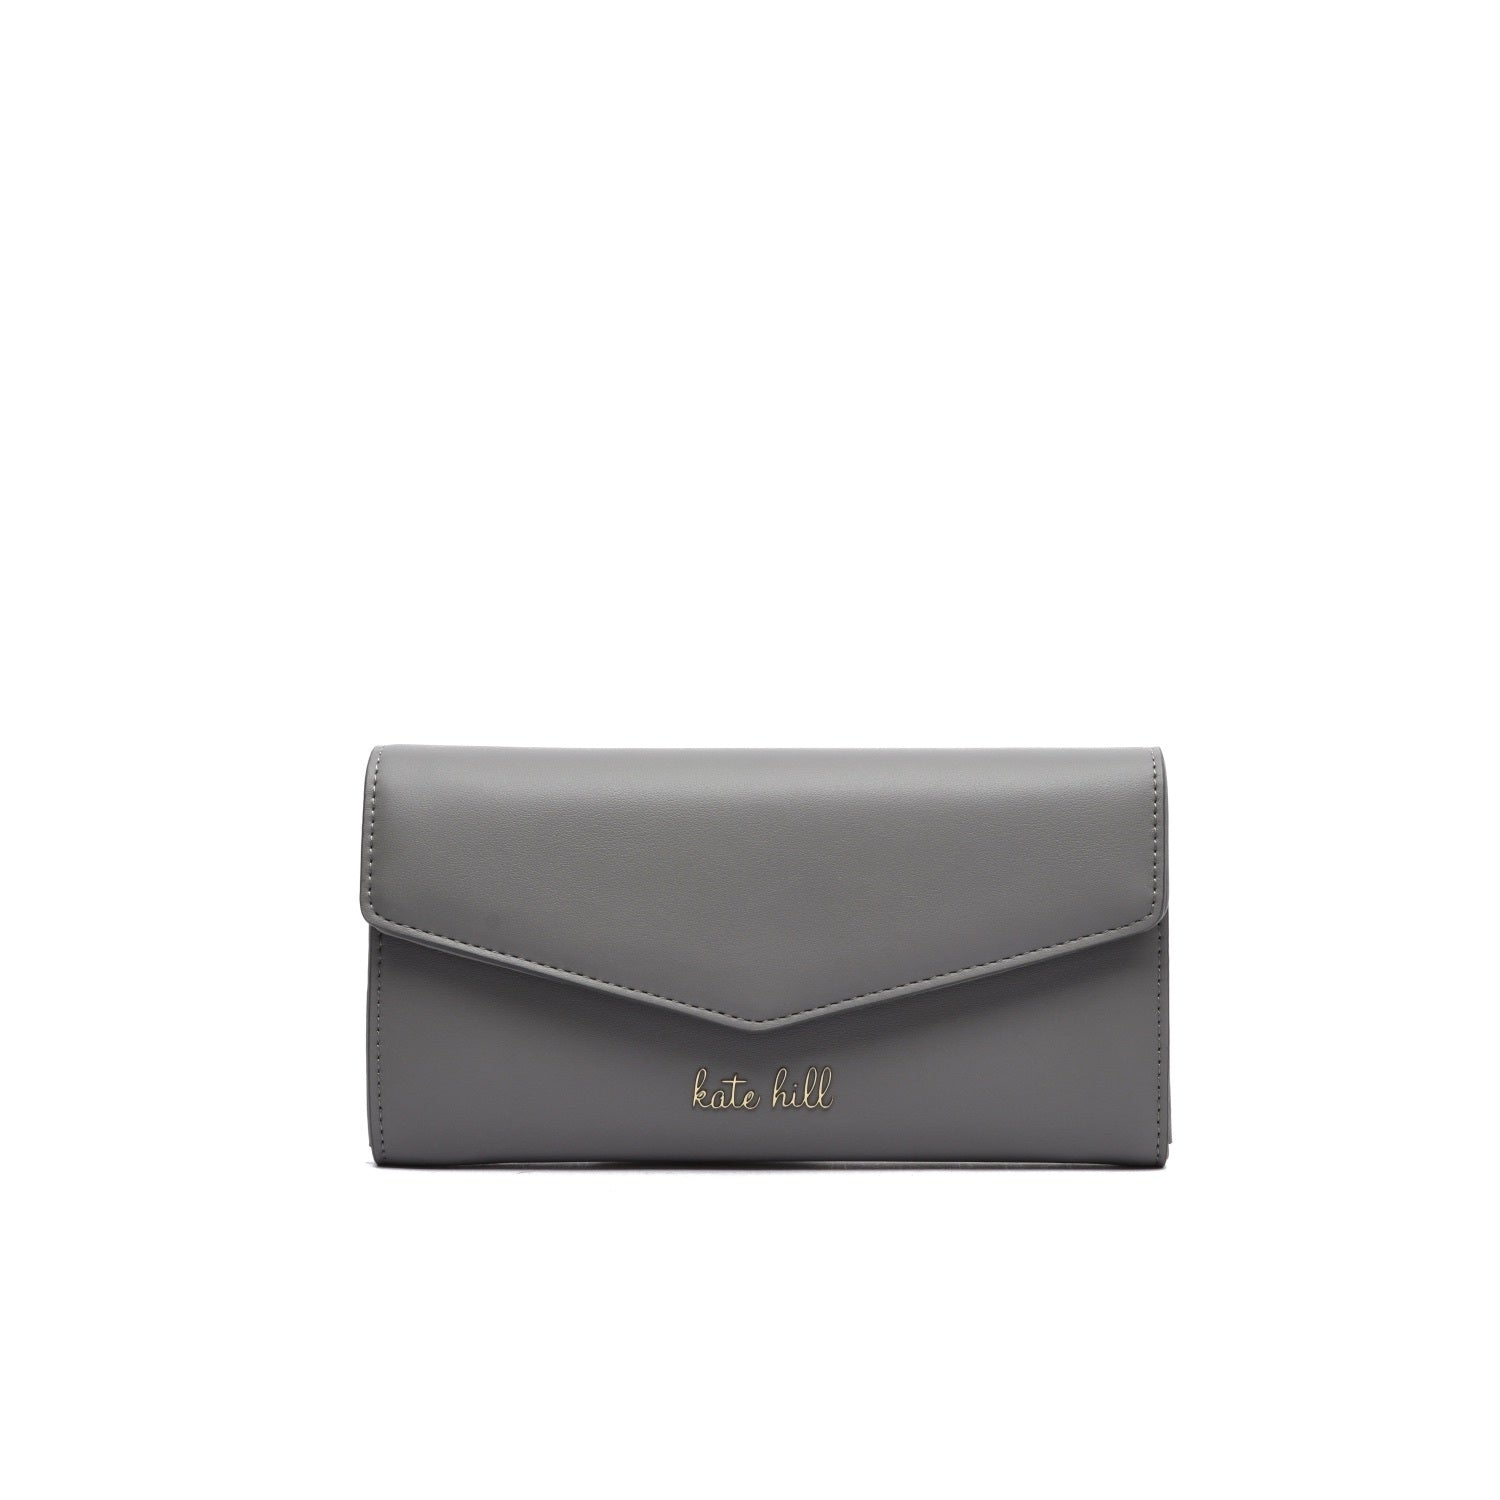 Kate Hill - Asher purse KH-22026 - Charcoal